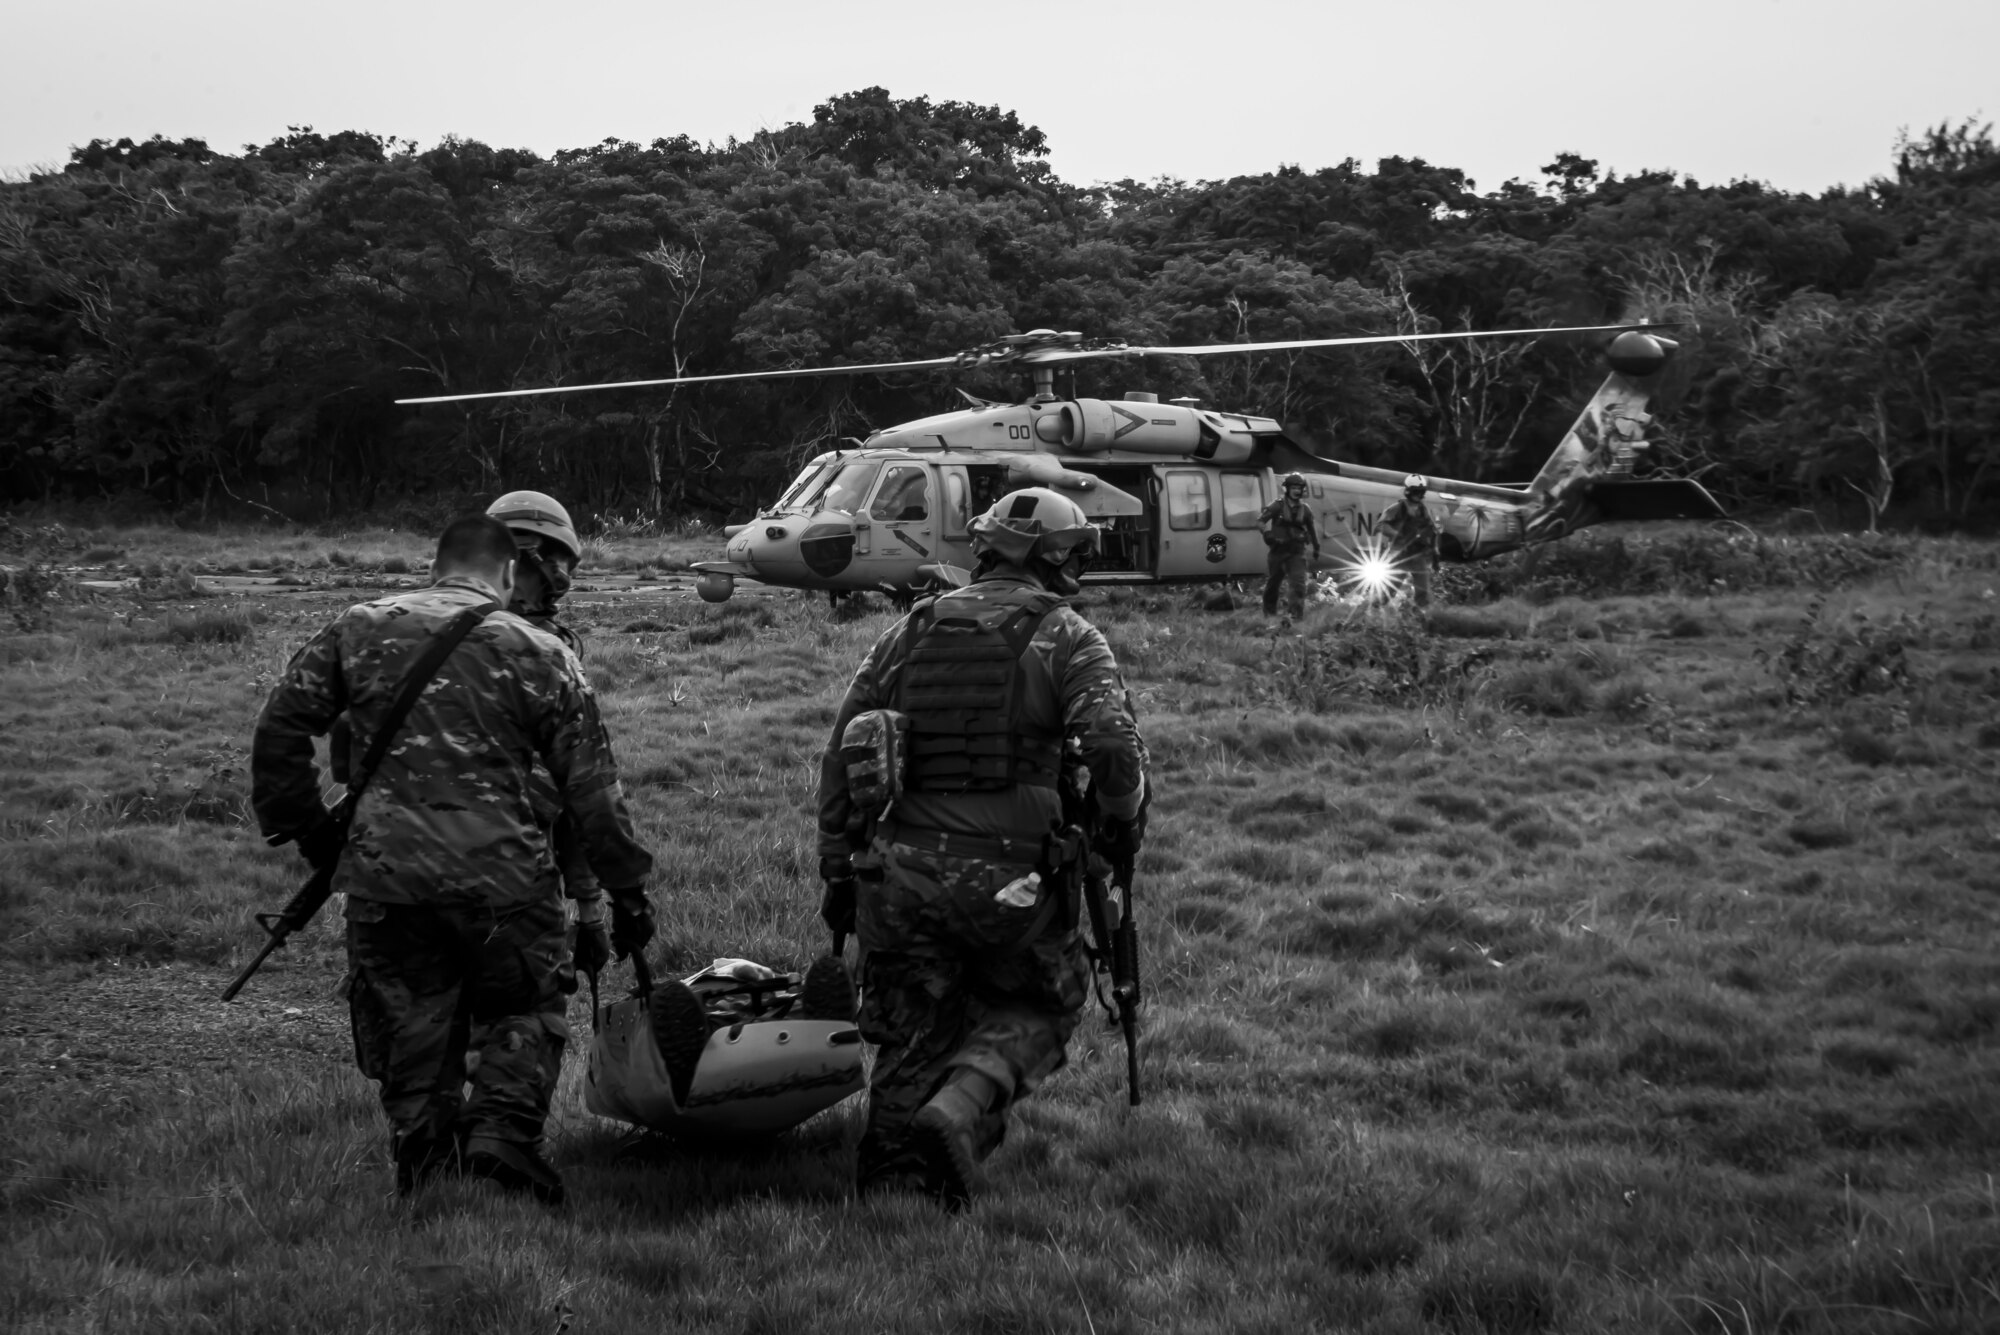 U.S. Air Force Airmen assigned to the 154th Fighter Wing, Hawaii Air National Guard carry a “fallen comrade” in a litter to a U.S. Navy Helicopter Sea Combat Squadron 25 helicopter as part of combat readiness training course during Operation Pacific Iron 2021, July 20, 2021, at Andersen Air Force Base, Guam.